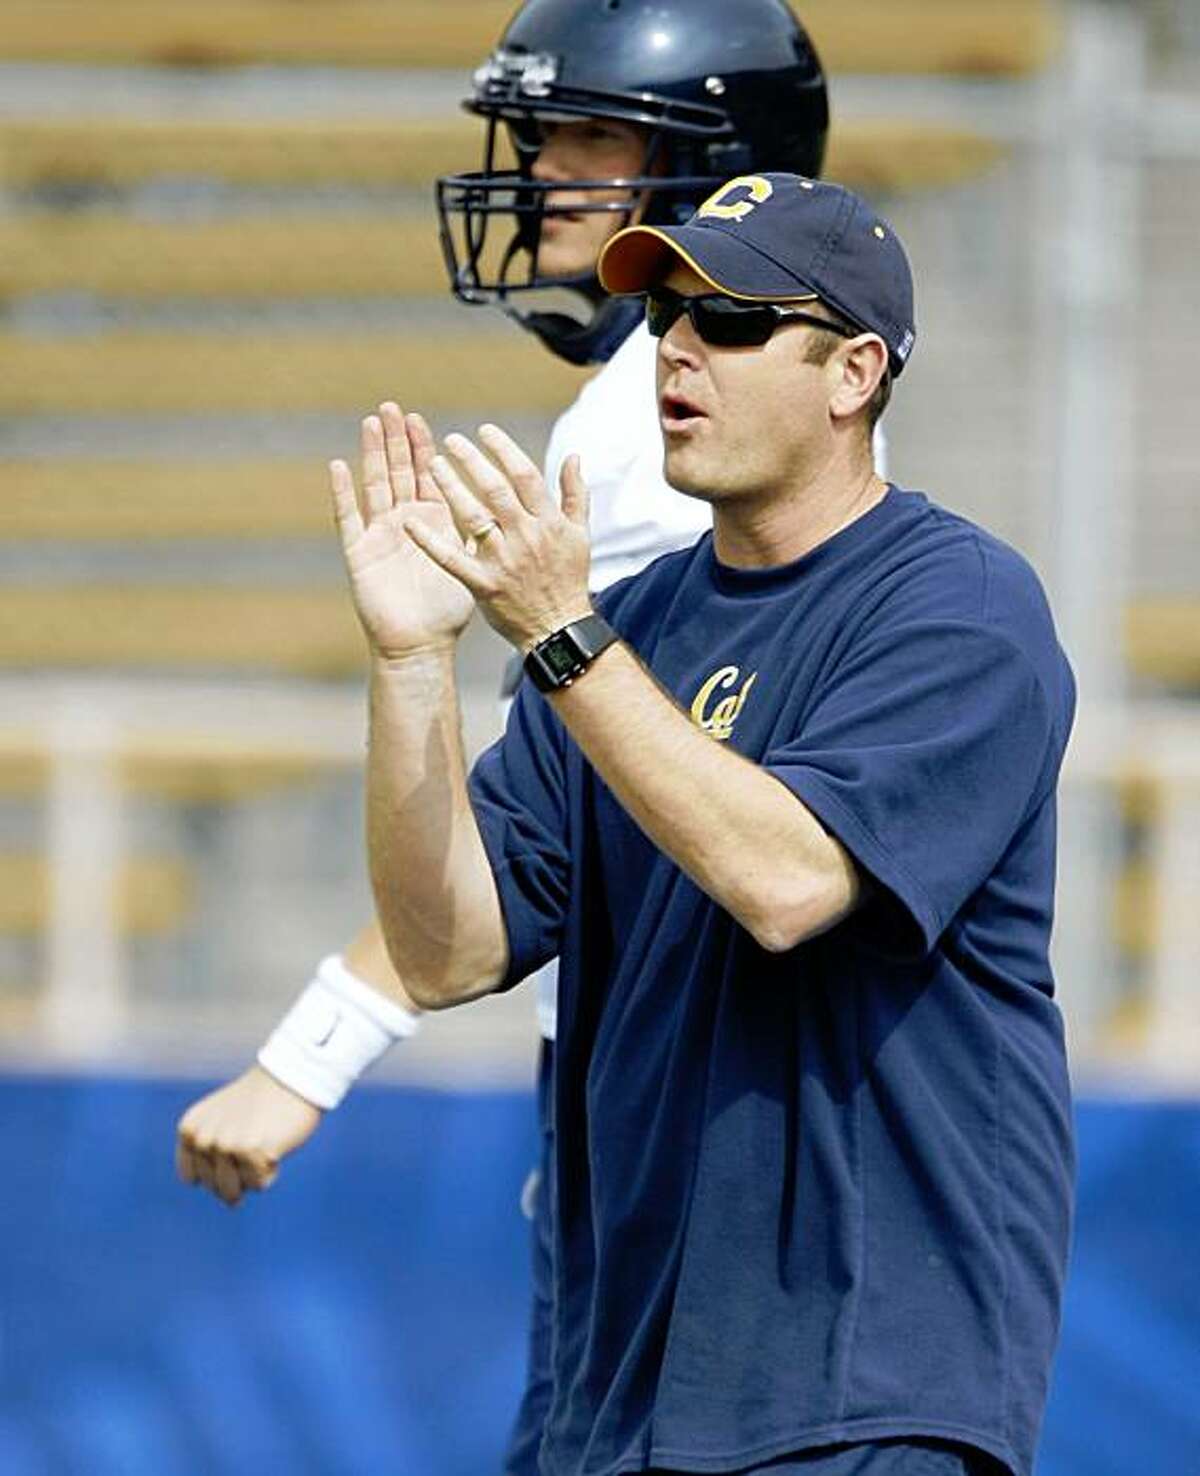 Cal football offensive coordinator Frank Cignetti works at a team practice at Memorial Stadium on the UC Berkeley (Calif.) campus on April 2, 2008. Quarterback Kevin Riley (13) Cal football quarterback Nate Longshore (6) Cal football defensive lineman Derrick Hill (76) Cal football wide receiver Michael Calvin (84) Cal football wide receiver Jeremy Ross (3) Cal football wide receiver Nyan Boateng (8) Cal football head coach coach Jeff Tedford Photo by Michael Maloney / San Francisco Chronicle